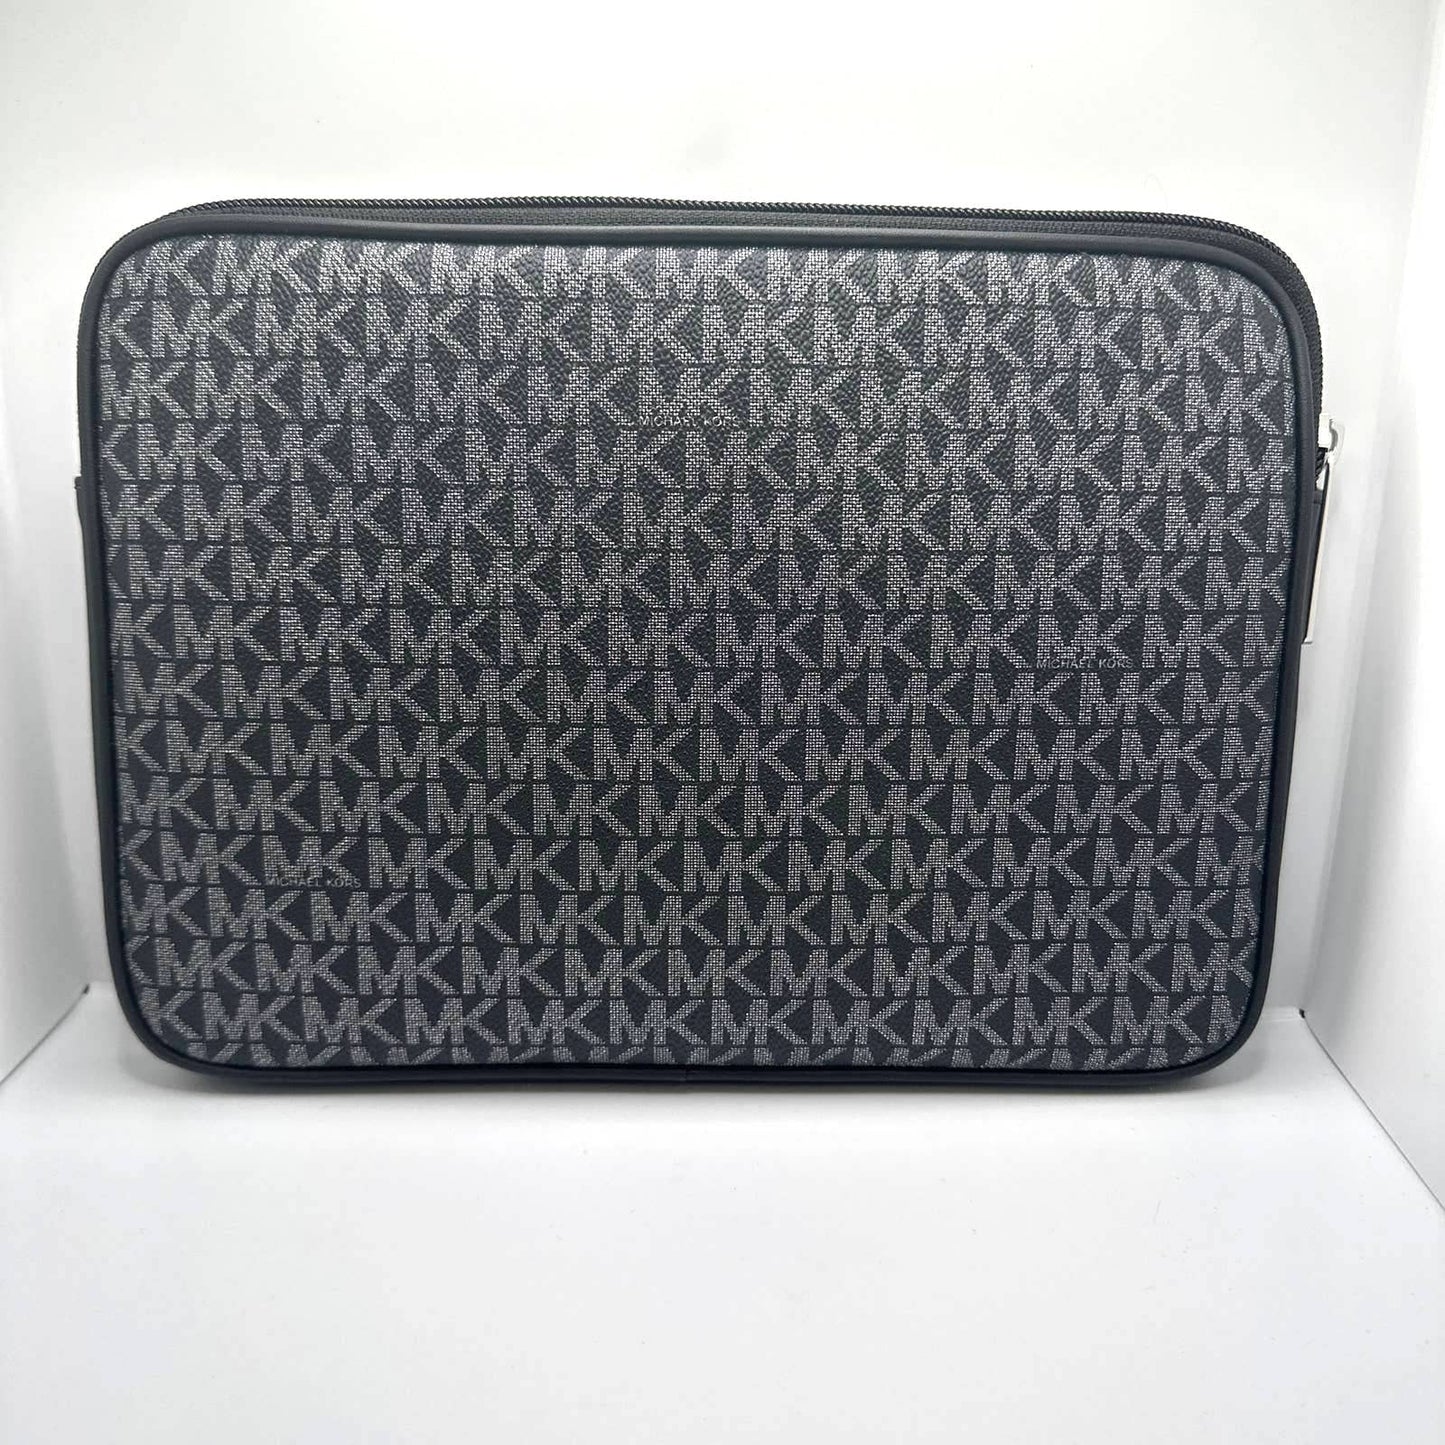 MICHAEL KORS Black and Silver Signature Coated Canvas Tablet Sleeve / Cover